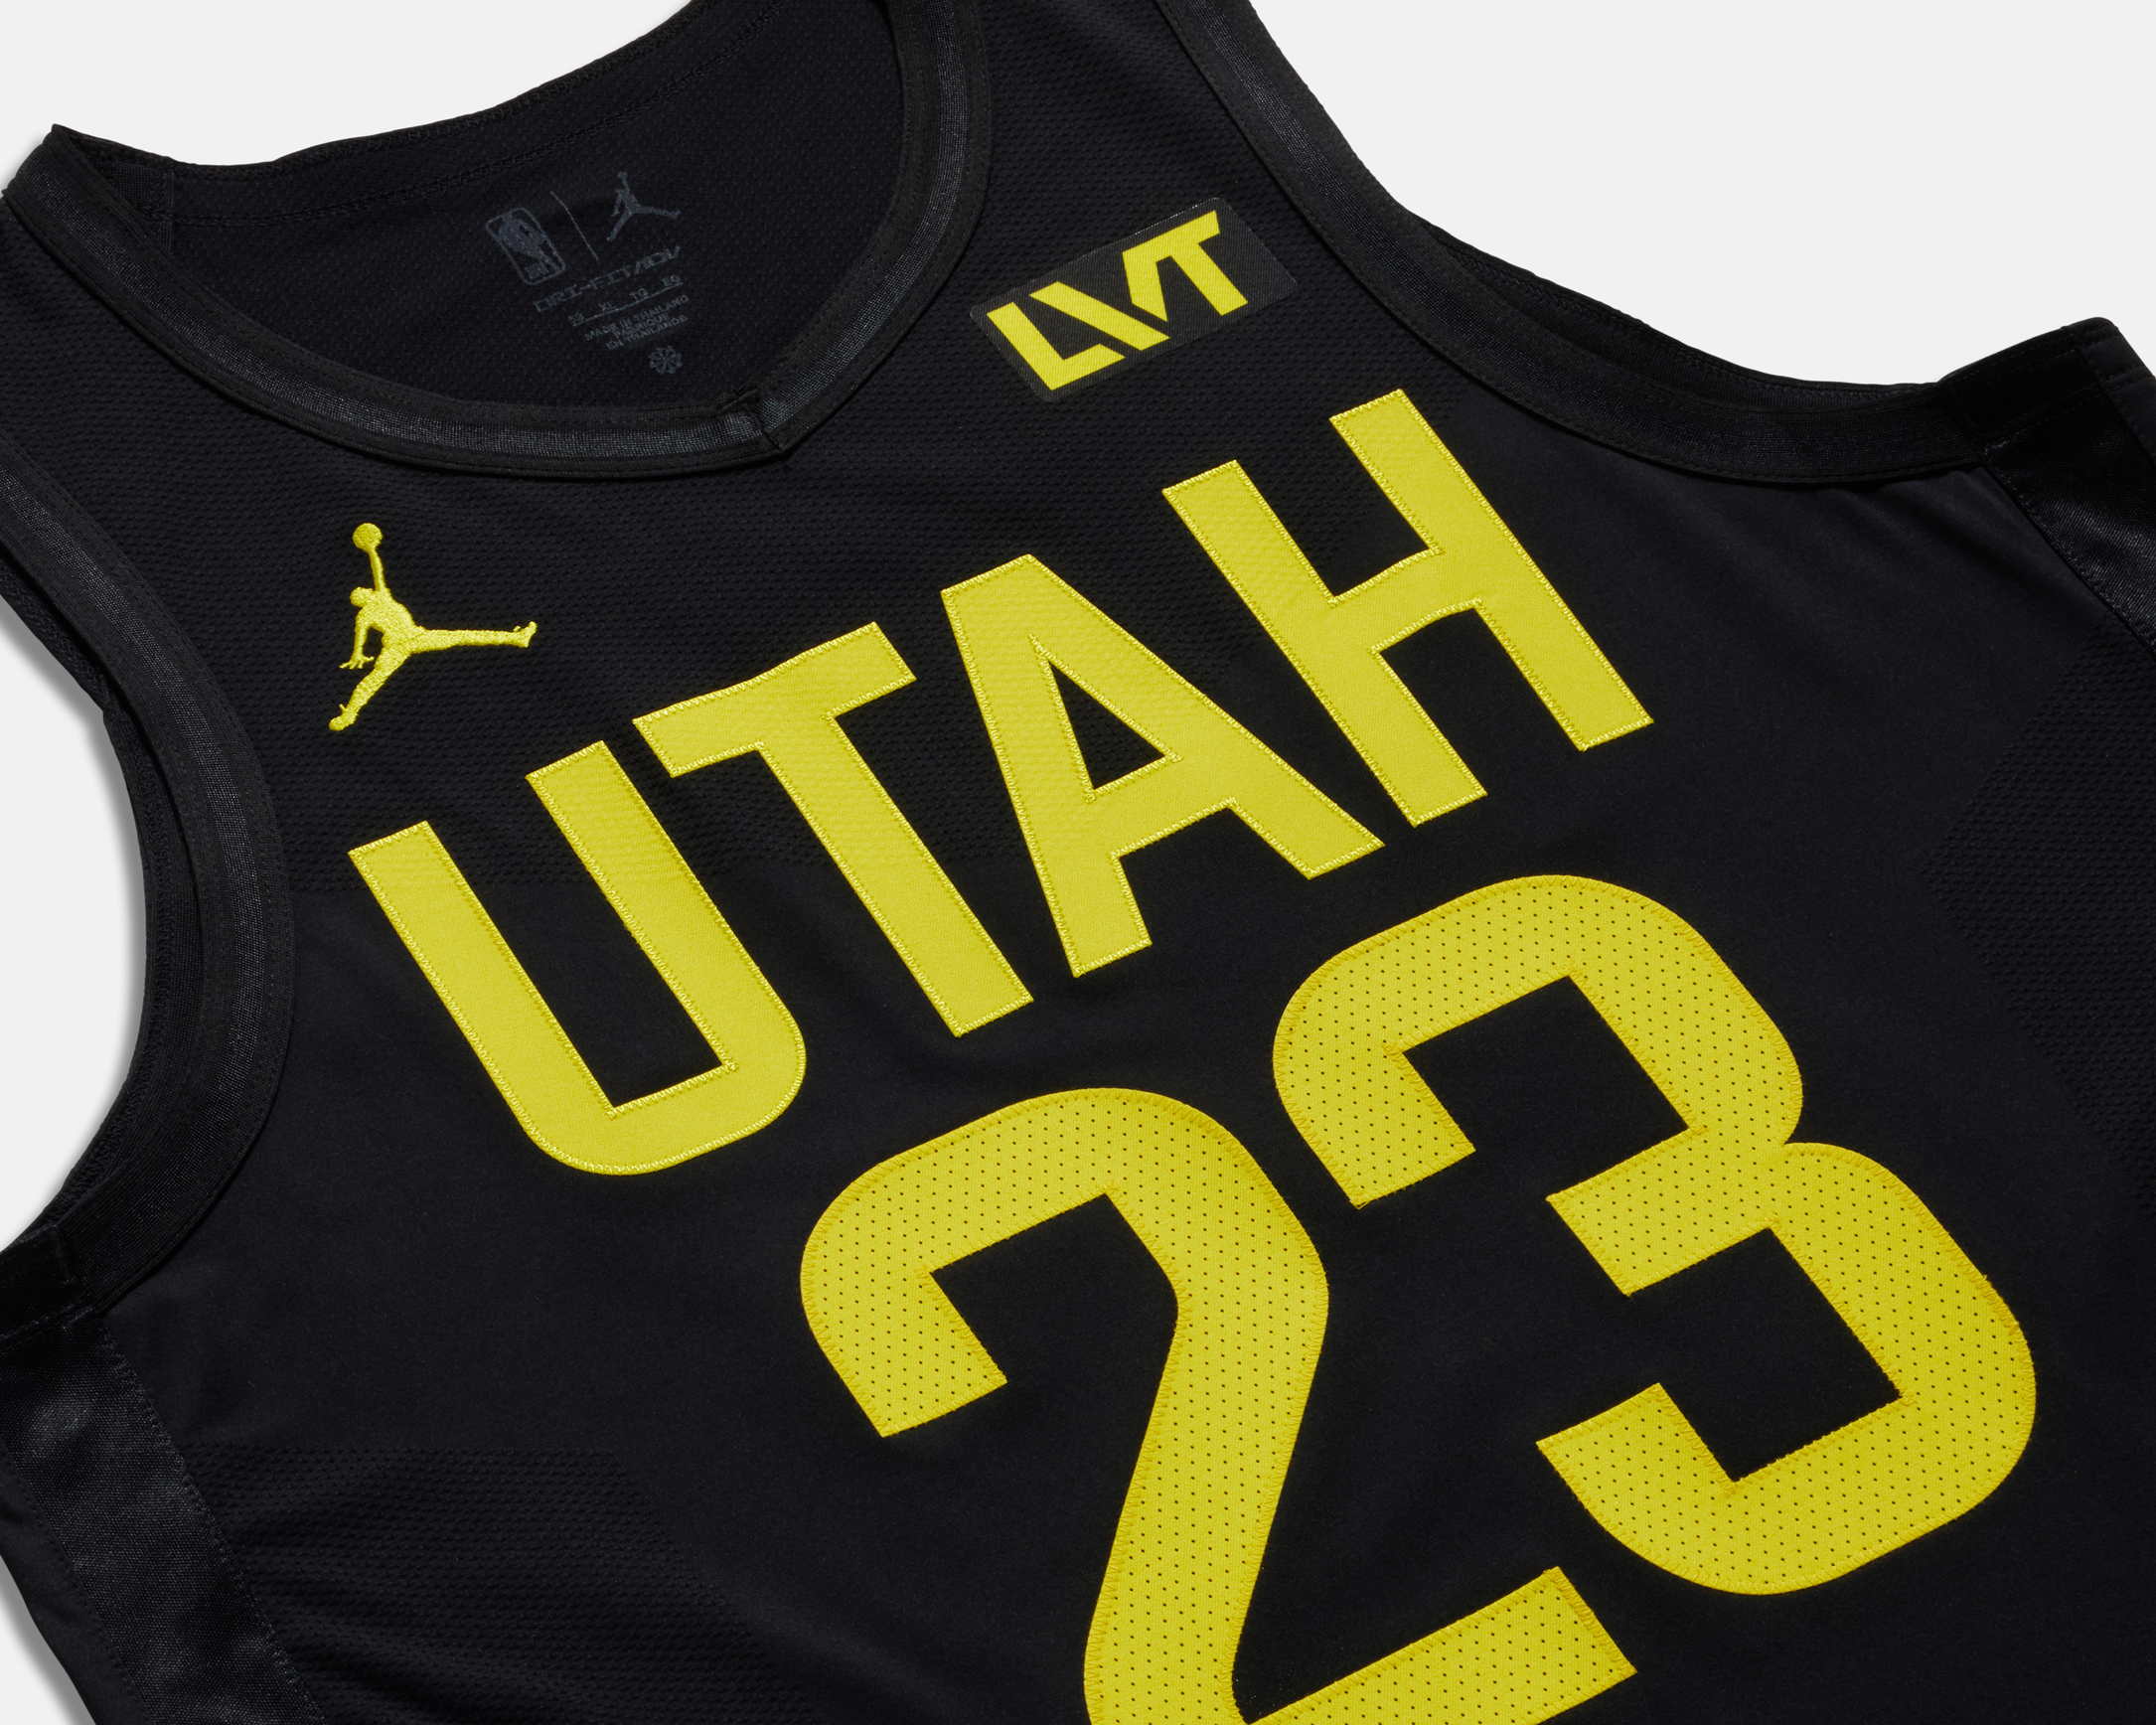 It's official . Utah Jazz will keep the same city edition jerseys